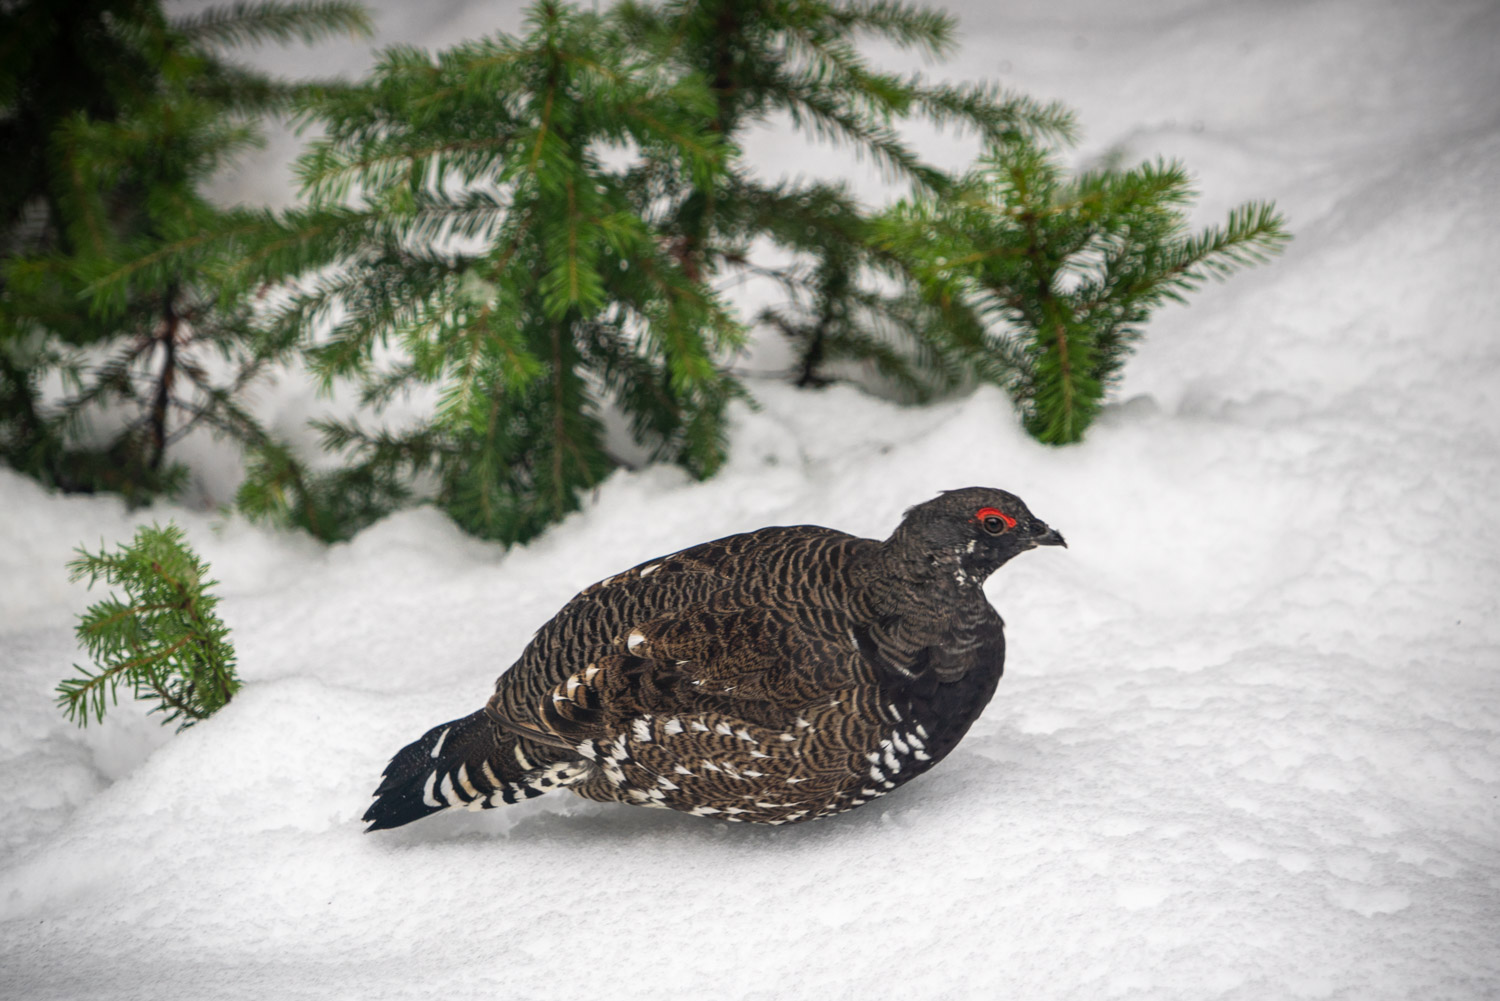 Spotted a Spruce Grouse in the snow!